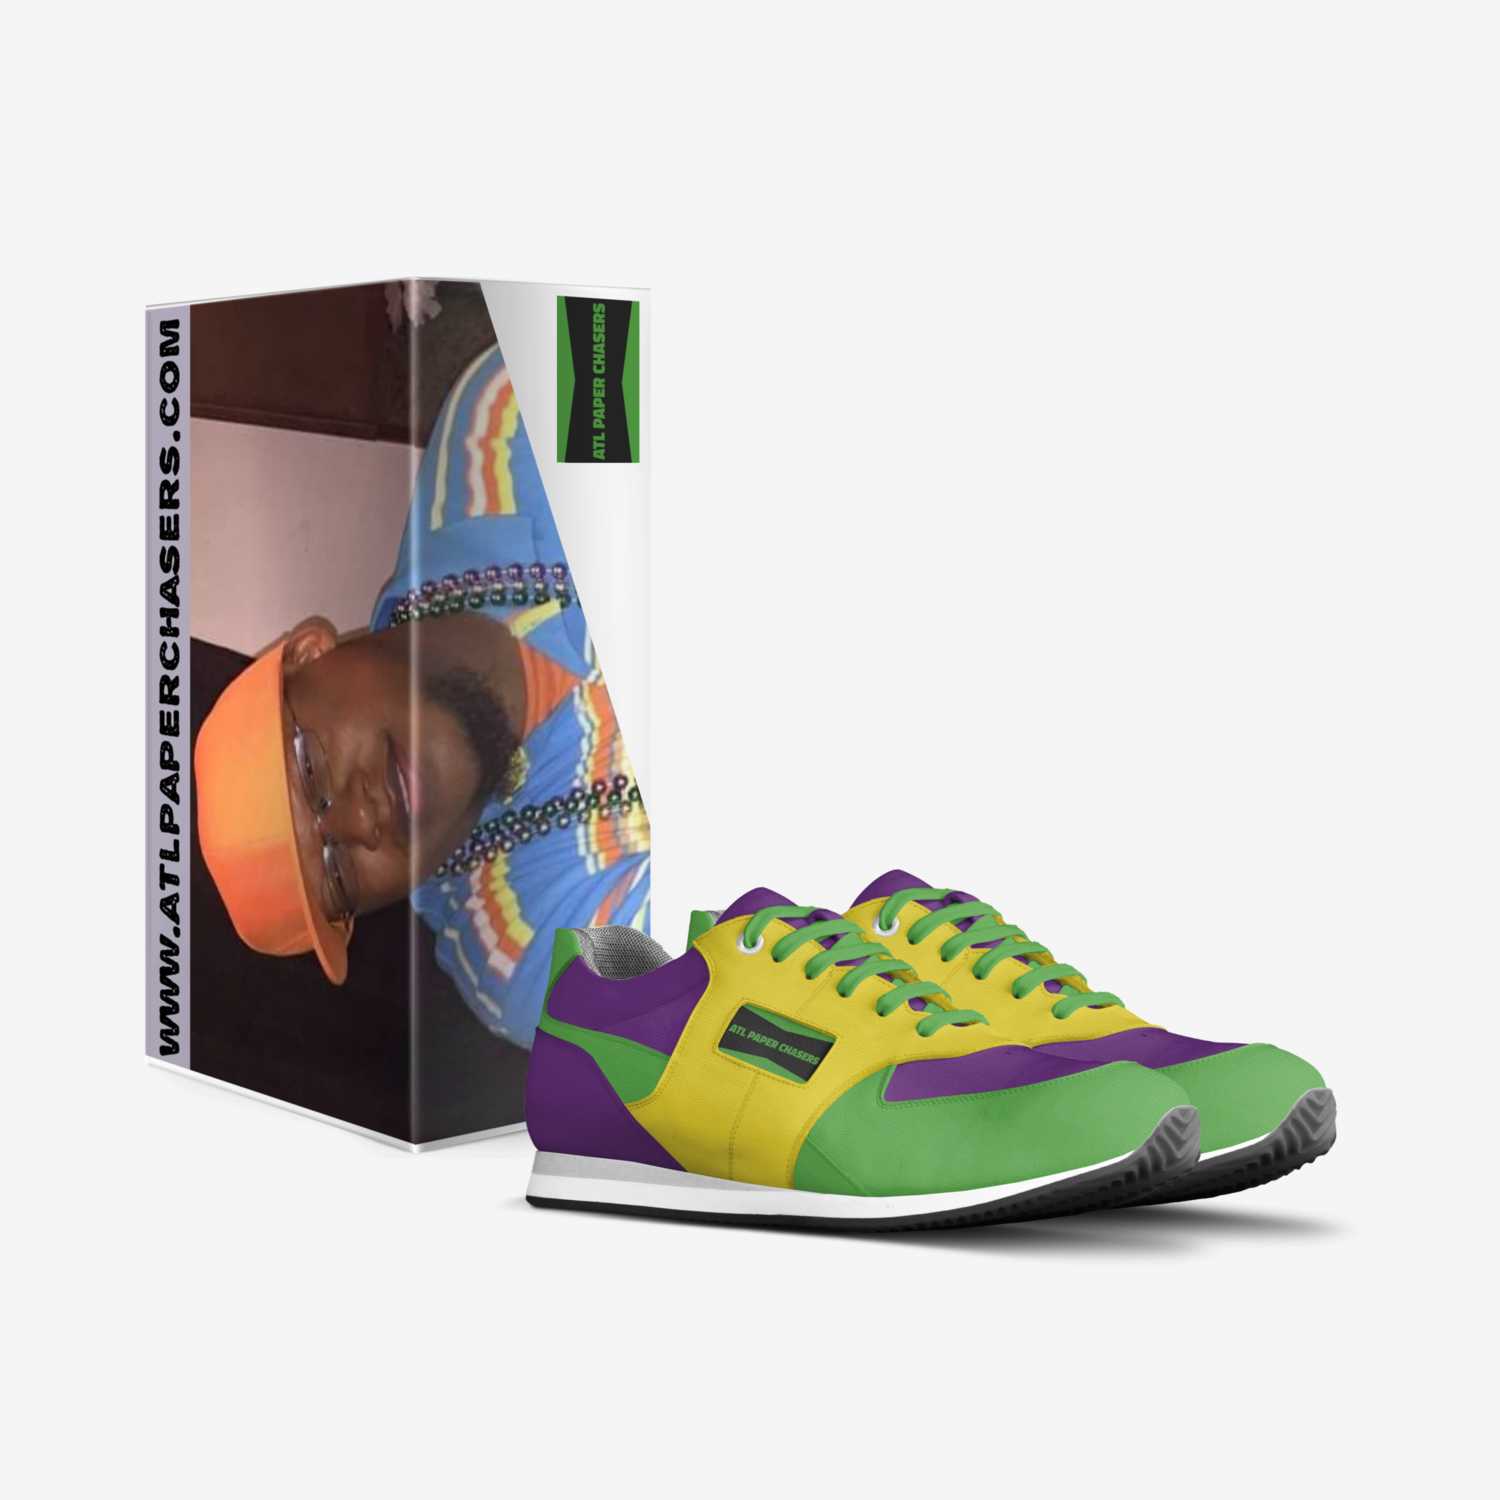 N.O. PARTY GRAS custom made in Italy shoes by Jameyel Price | Box view